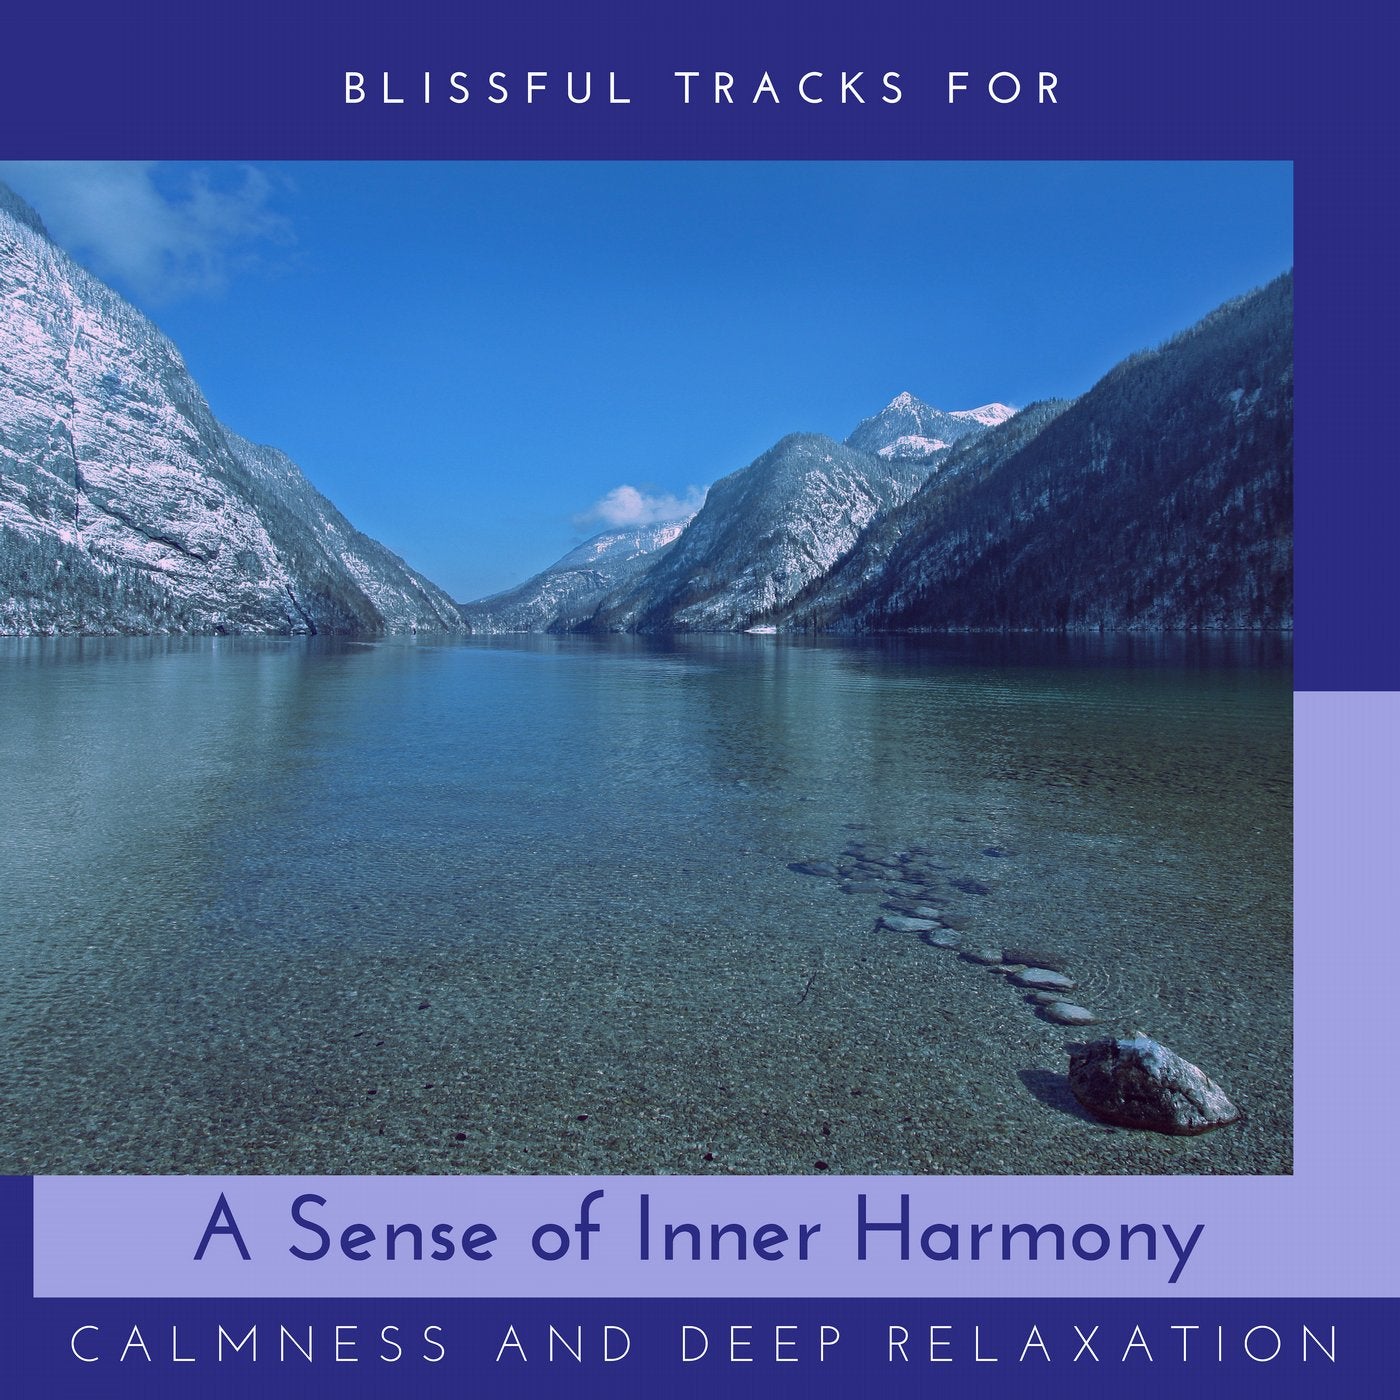 A Sense Of Inner Harmony - Blissful Tracks For Calmness And Deep Relaxation